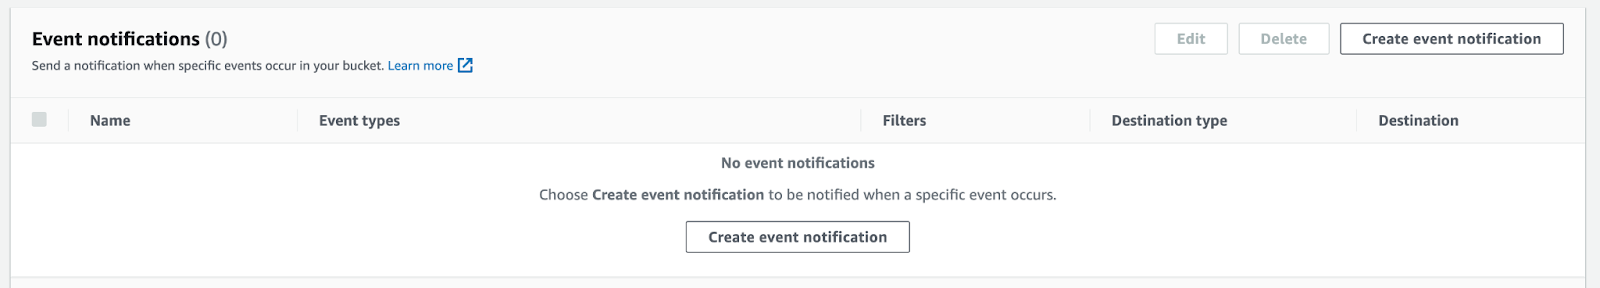 Screenshot of empty event notfications dashboard in AWS